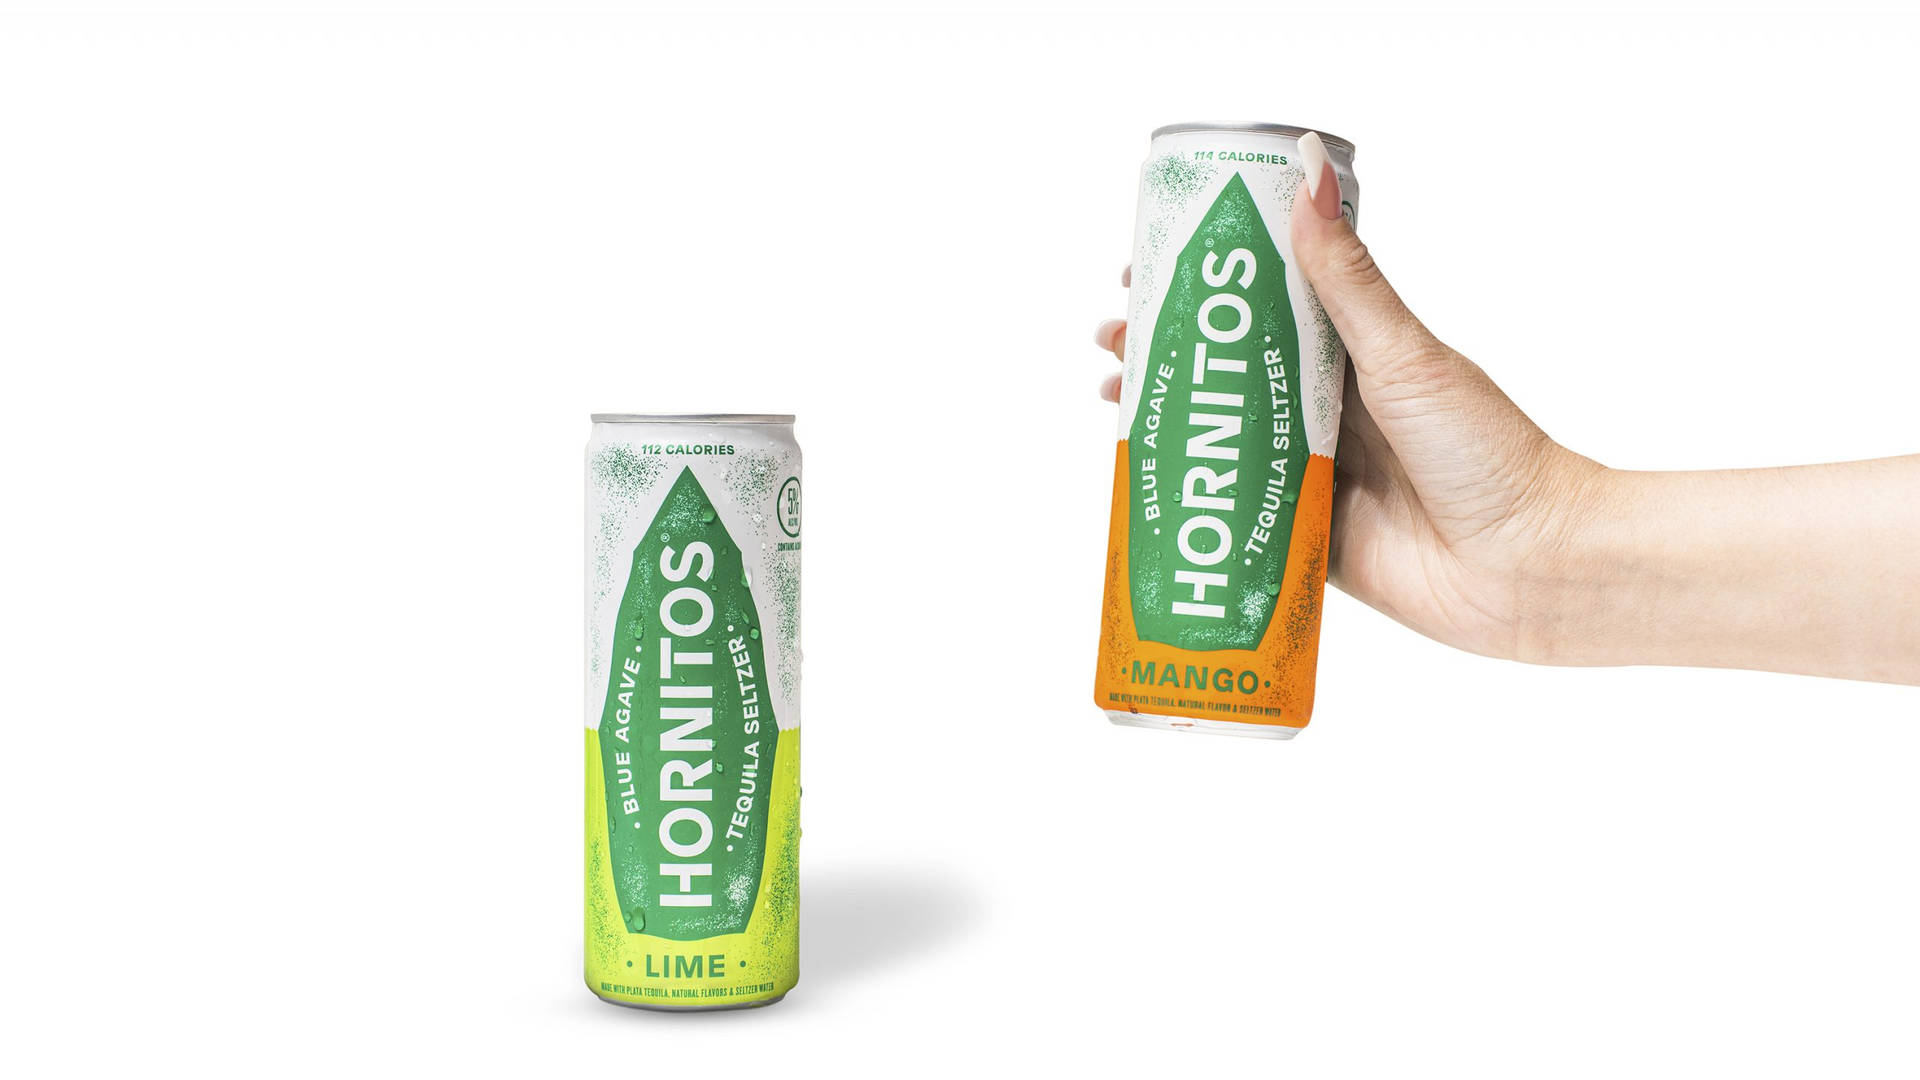 Refreshing Hornitos Tequila Seltzer in Mango and Lime Flavor Wallpaper